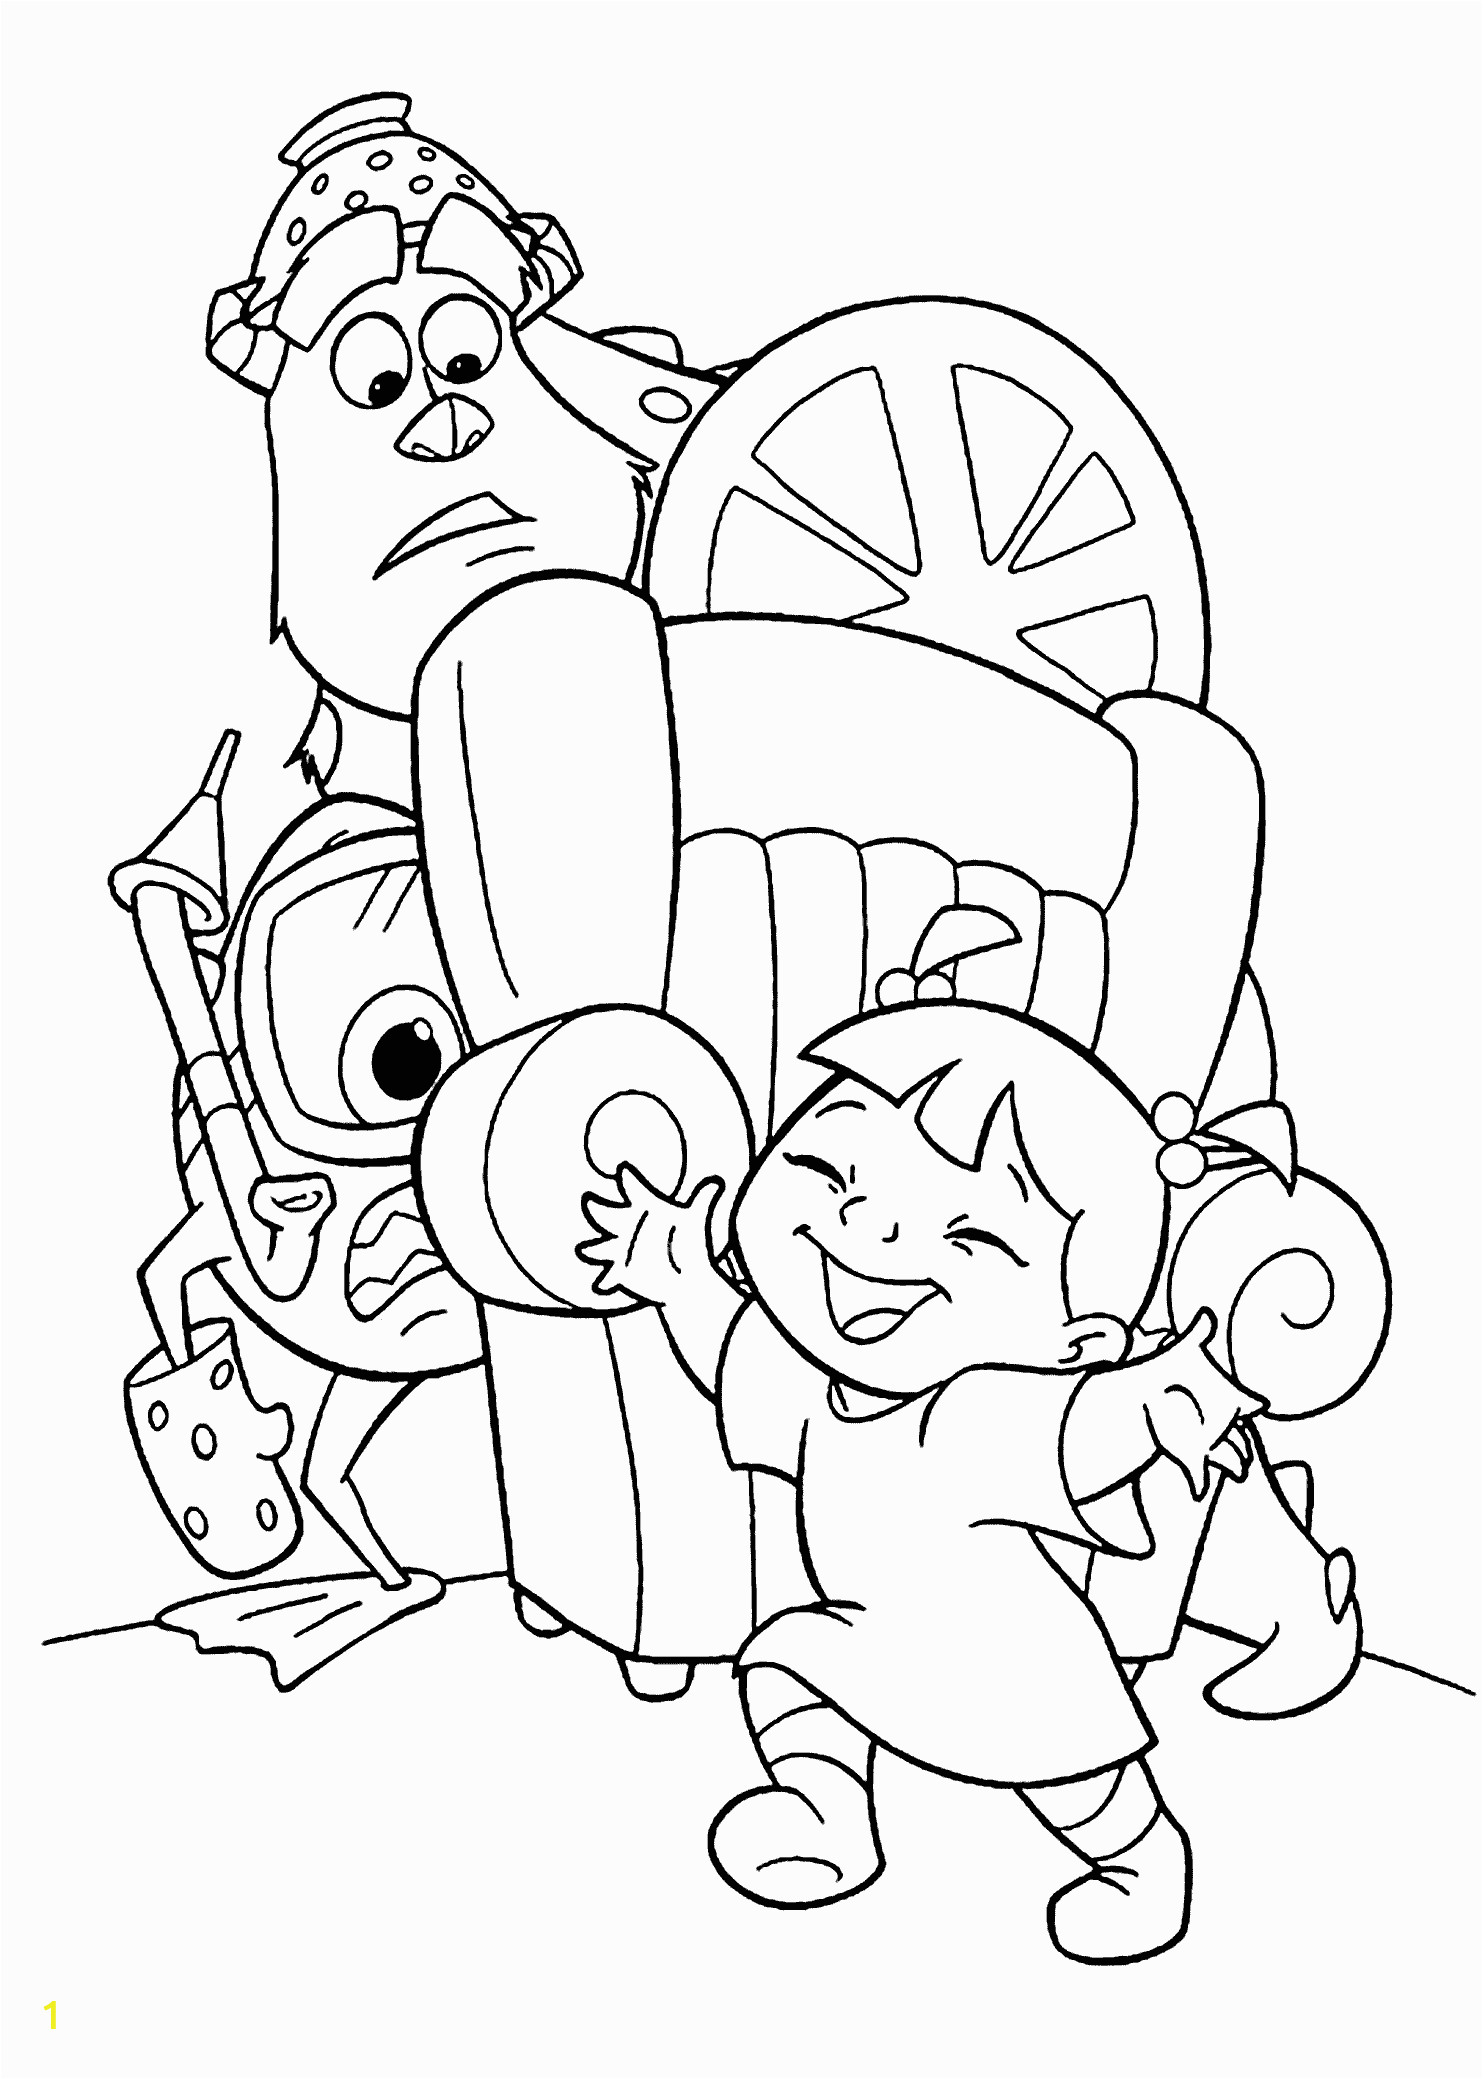 Monster Inc Coloring Pages to Print Monster Inc Cartoon Coloring Pages for Kids Printable